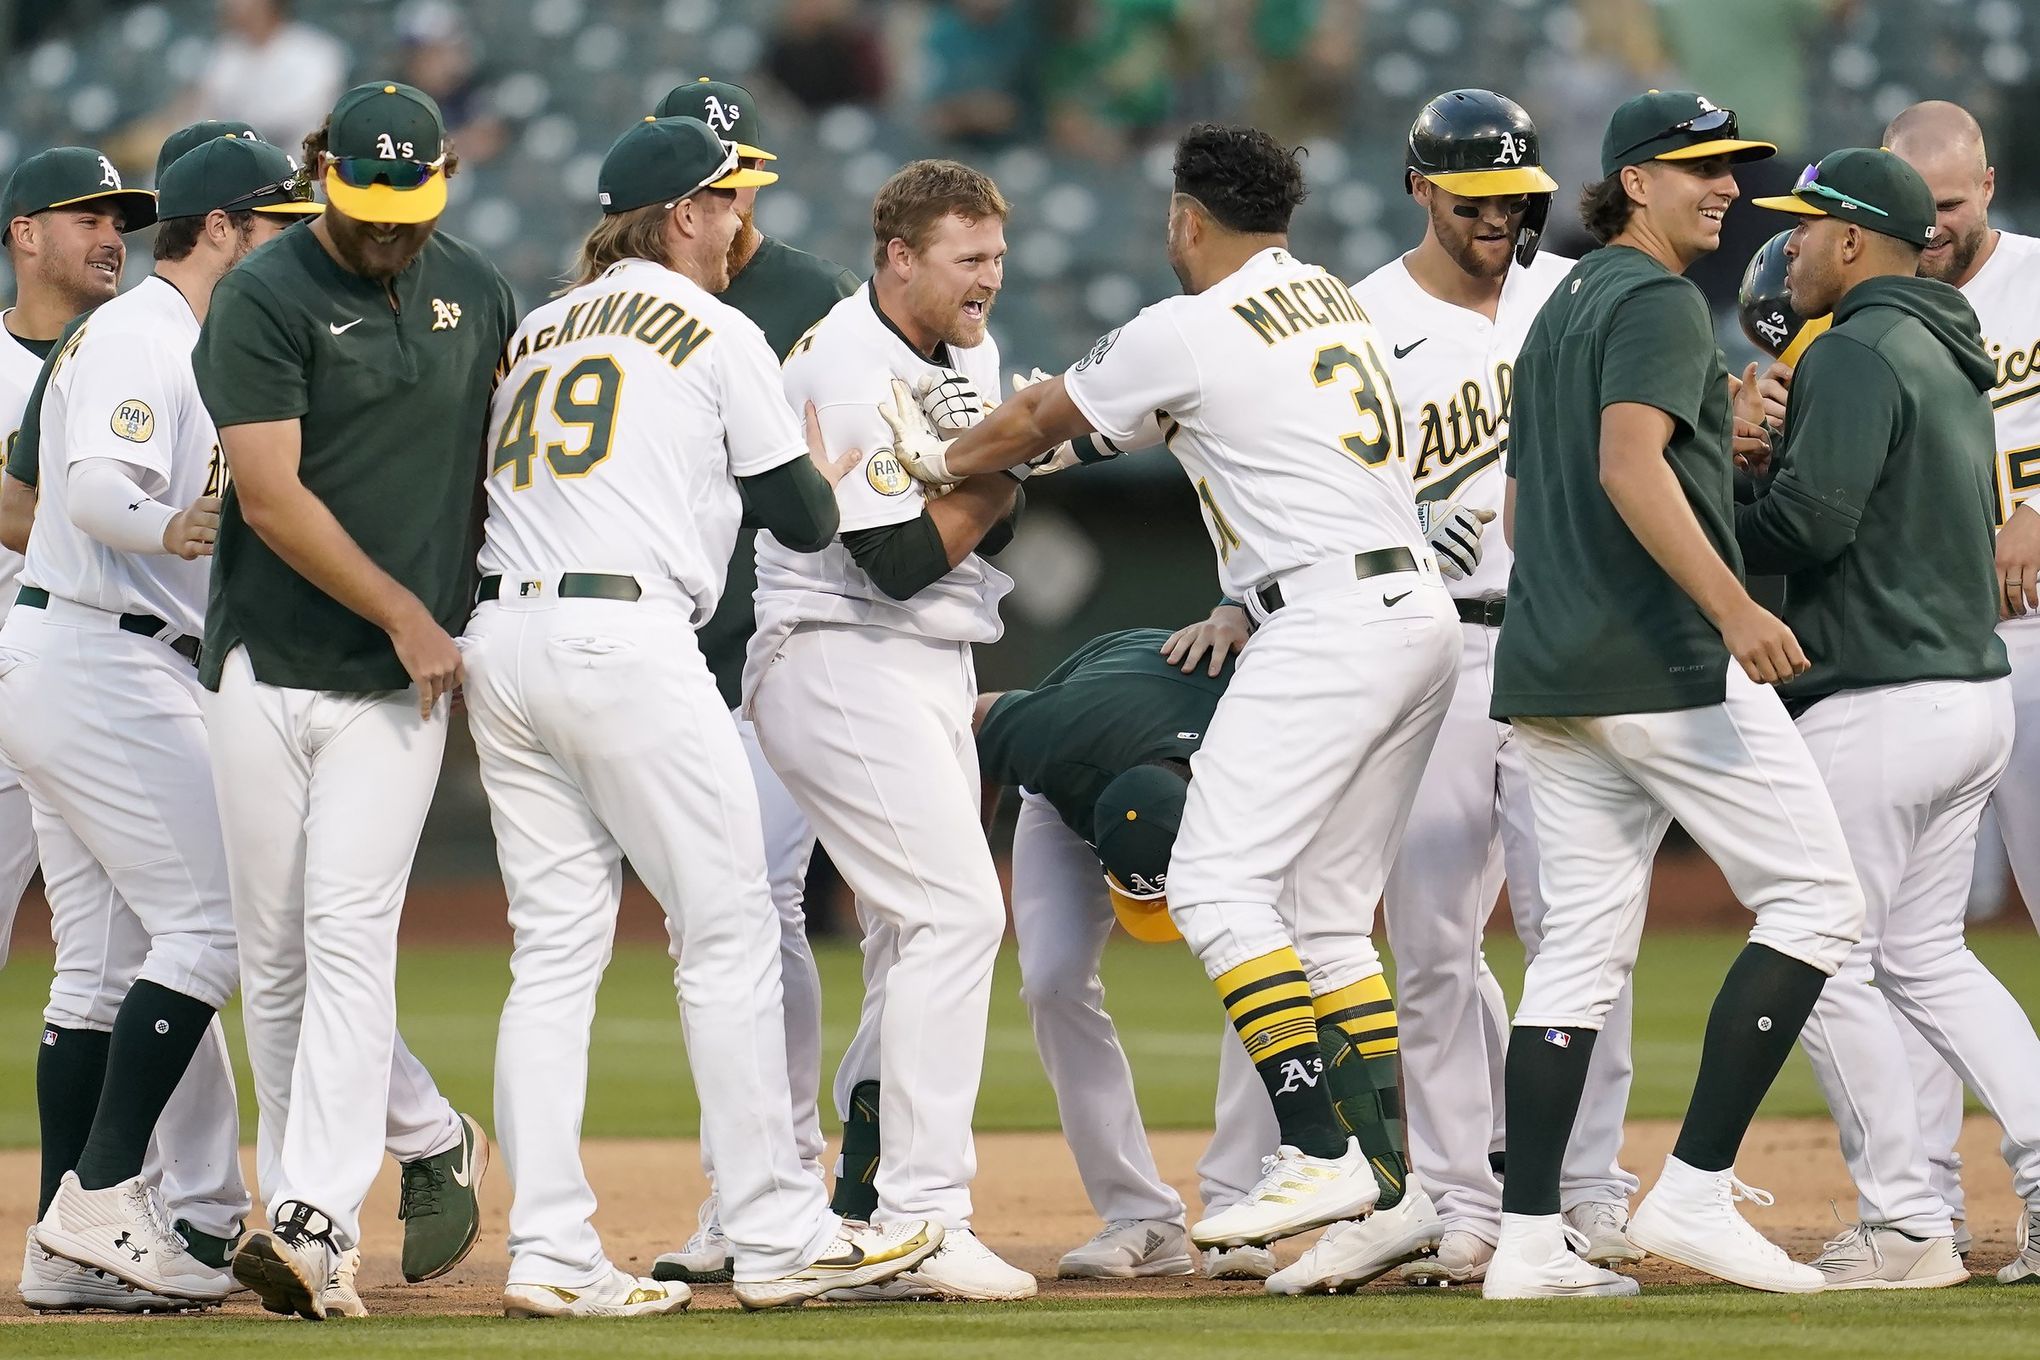 Oakland Athletics' Cal Stevenson runs to first base after earning